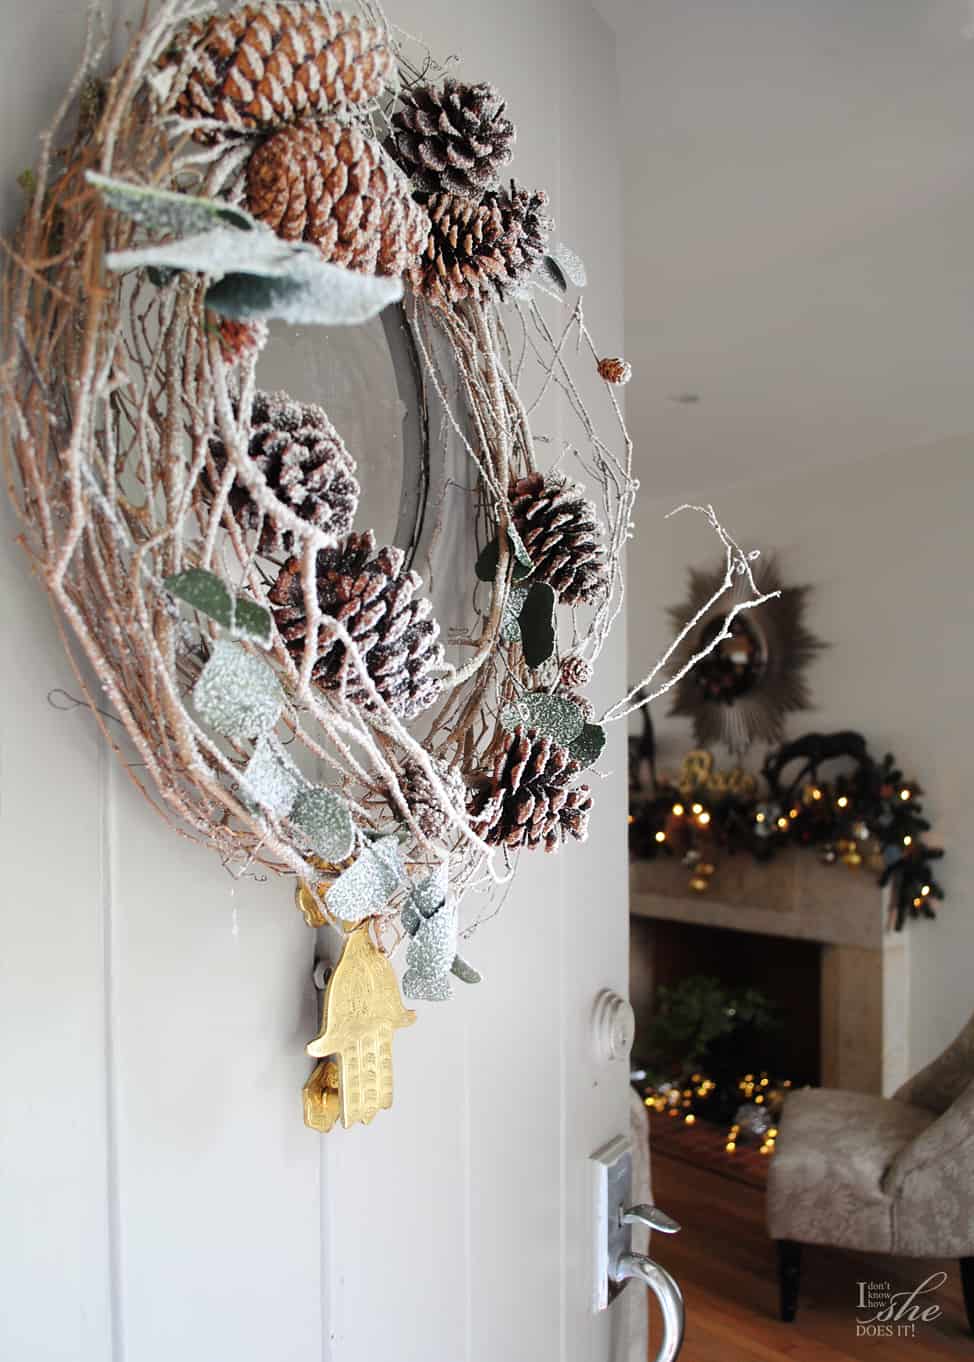 A rustic wreath made of wrapped branches, pine cones and frosted leaves